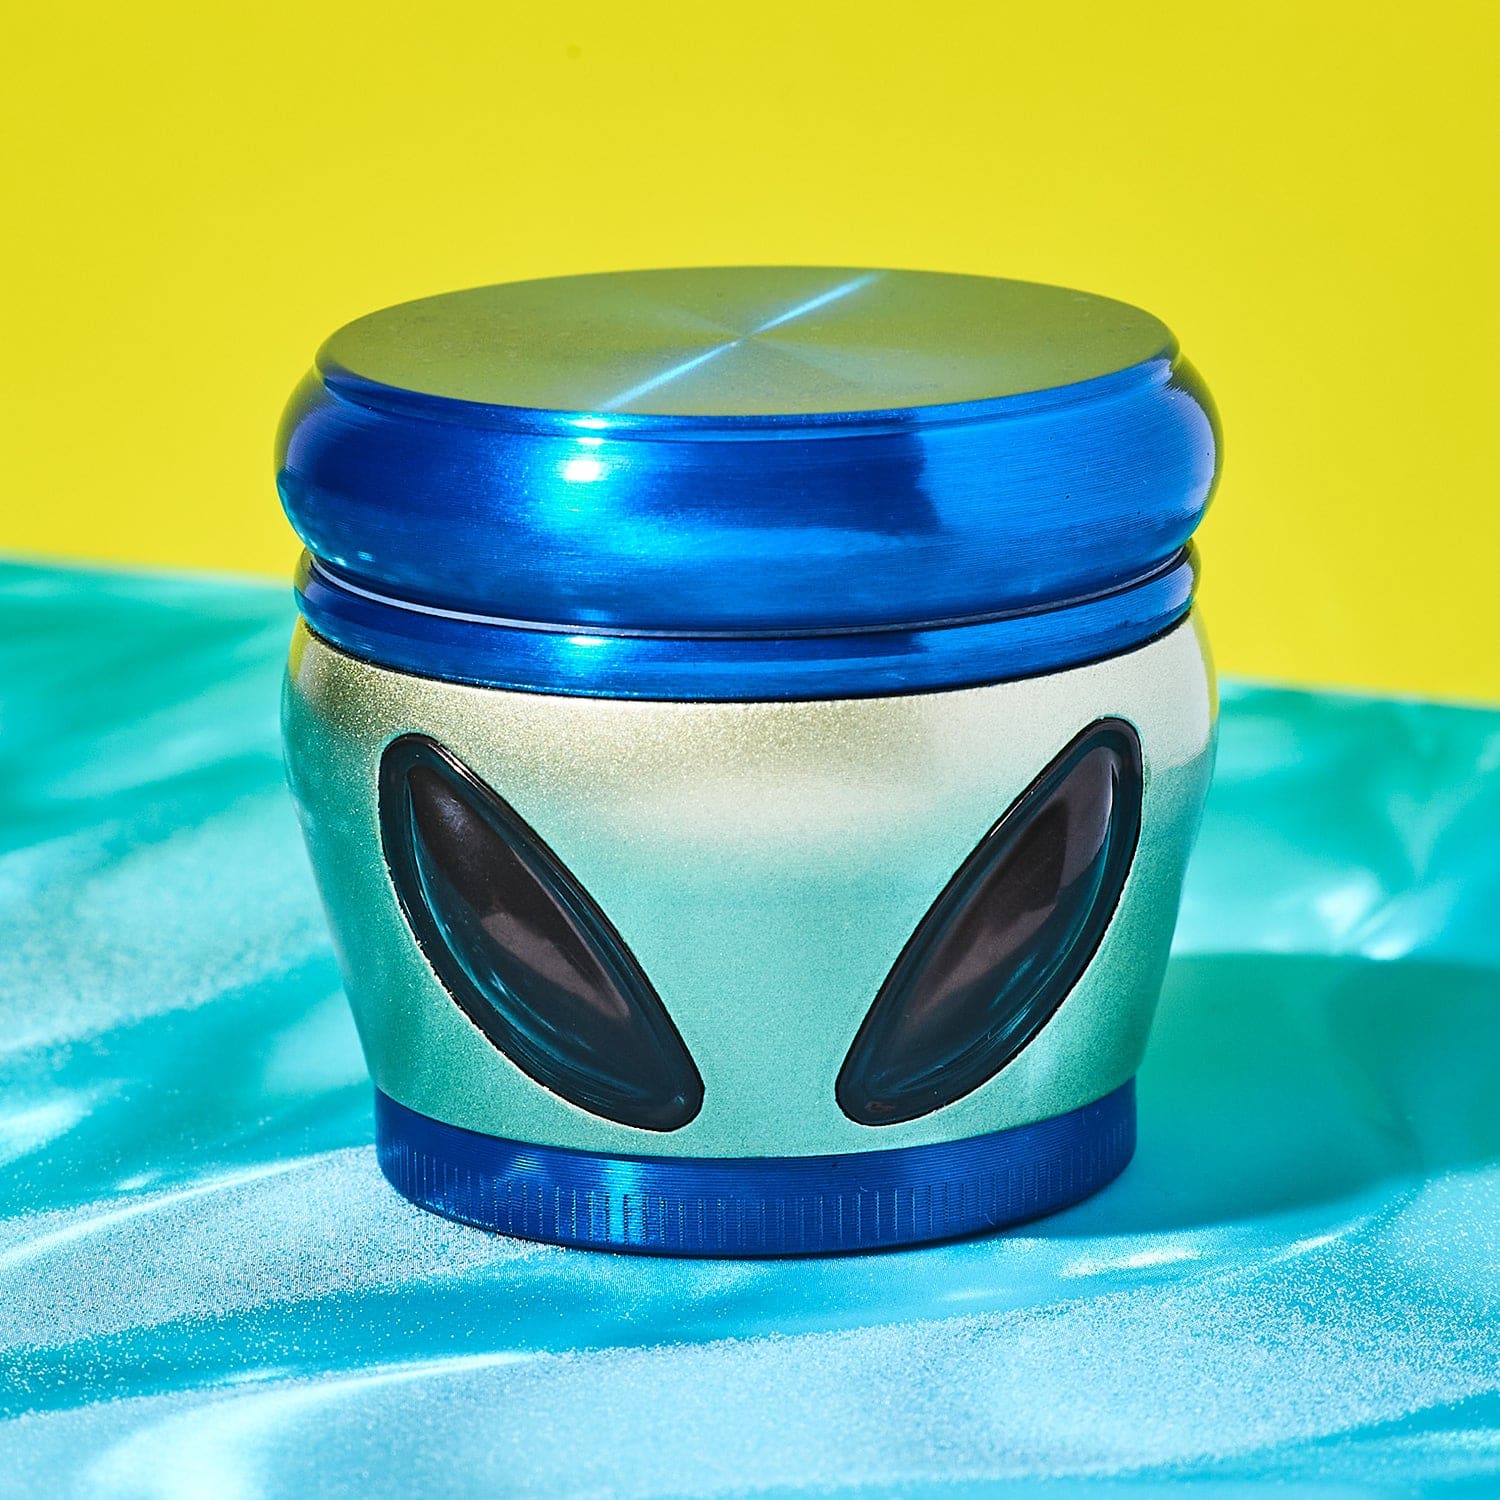 https://cdn.shopify.com/s/files/1/2636/1058/products/alien-eyes-grinder-cute-fathers-gifts-smoke-shop-761.jpg